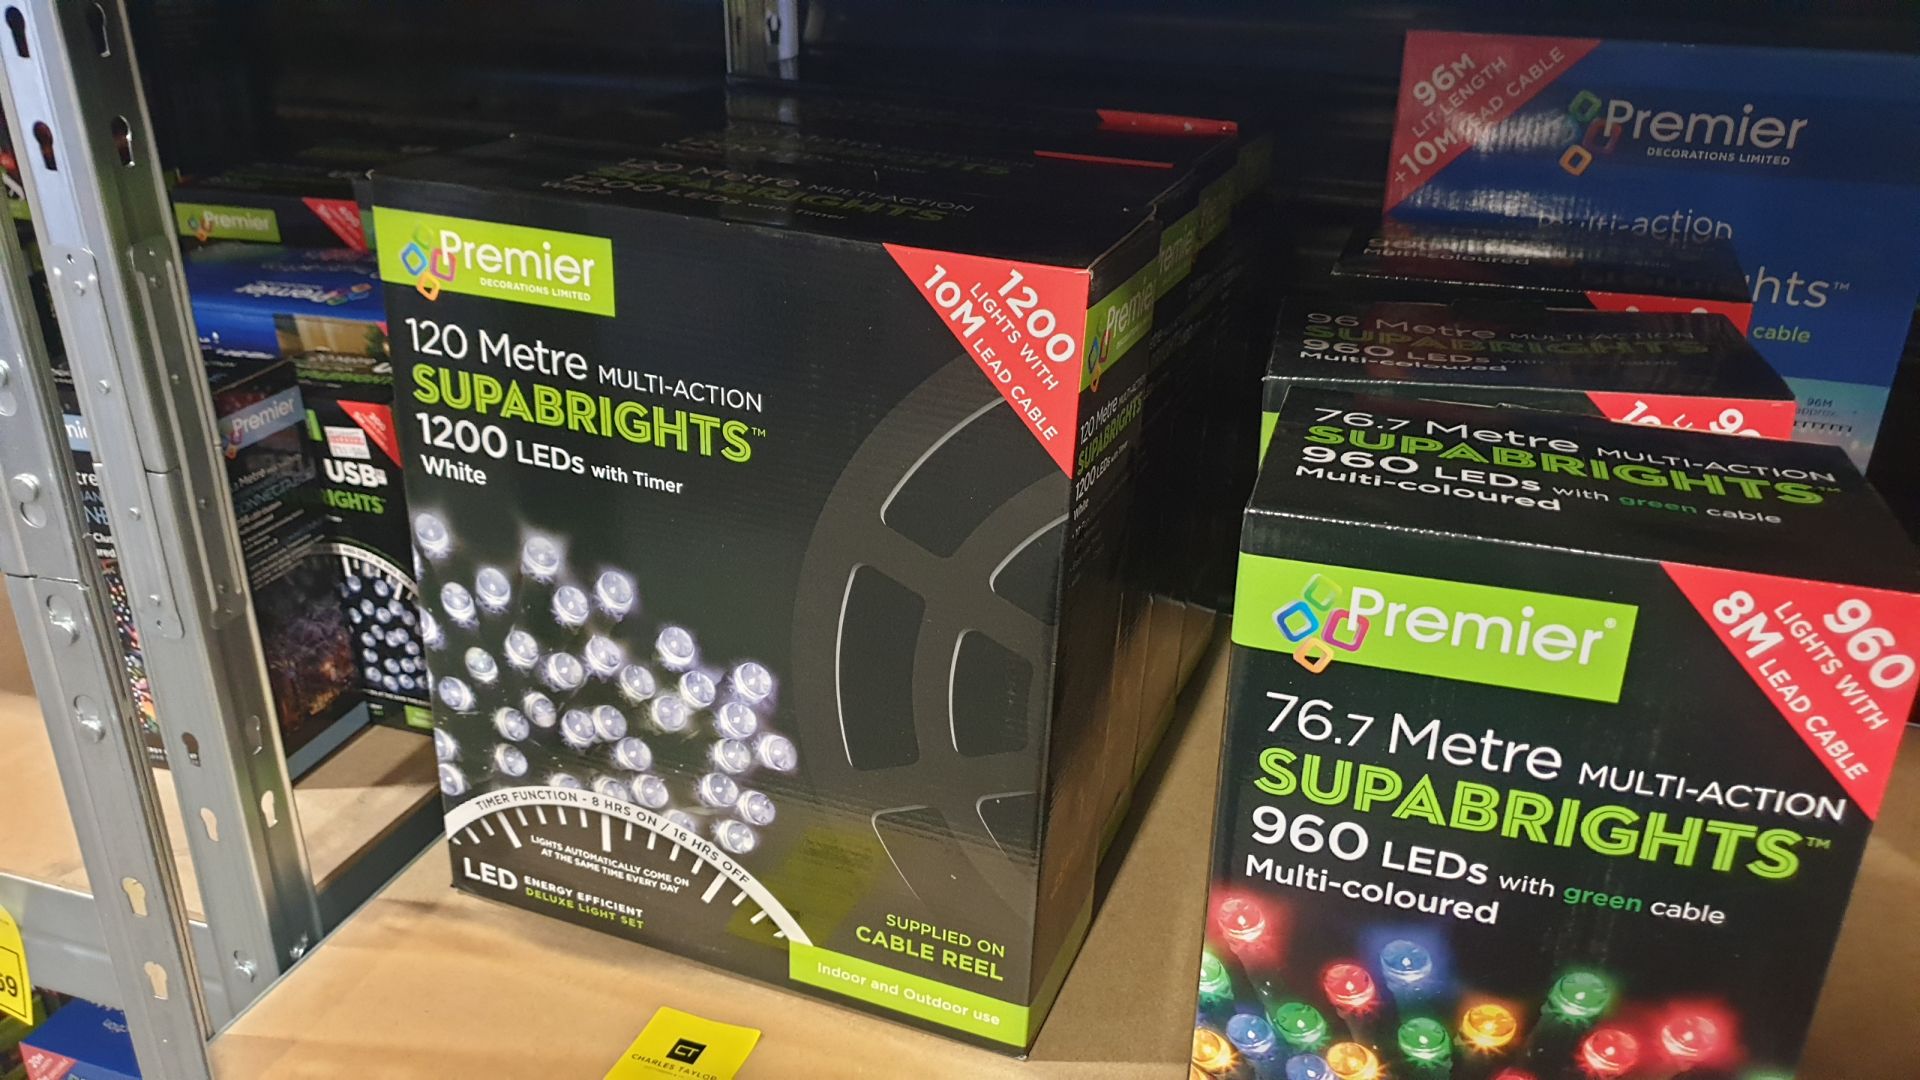 MIXED PREMIER LIGHTS LOT CONTAINING 4 PIECES IE 120M MULTI-ACTION 1200 WHITE LED SUPABRIGHTS WITH